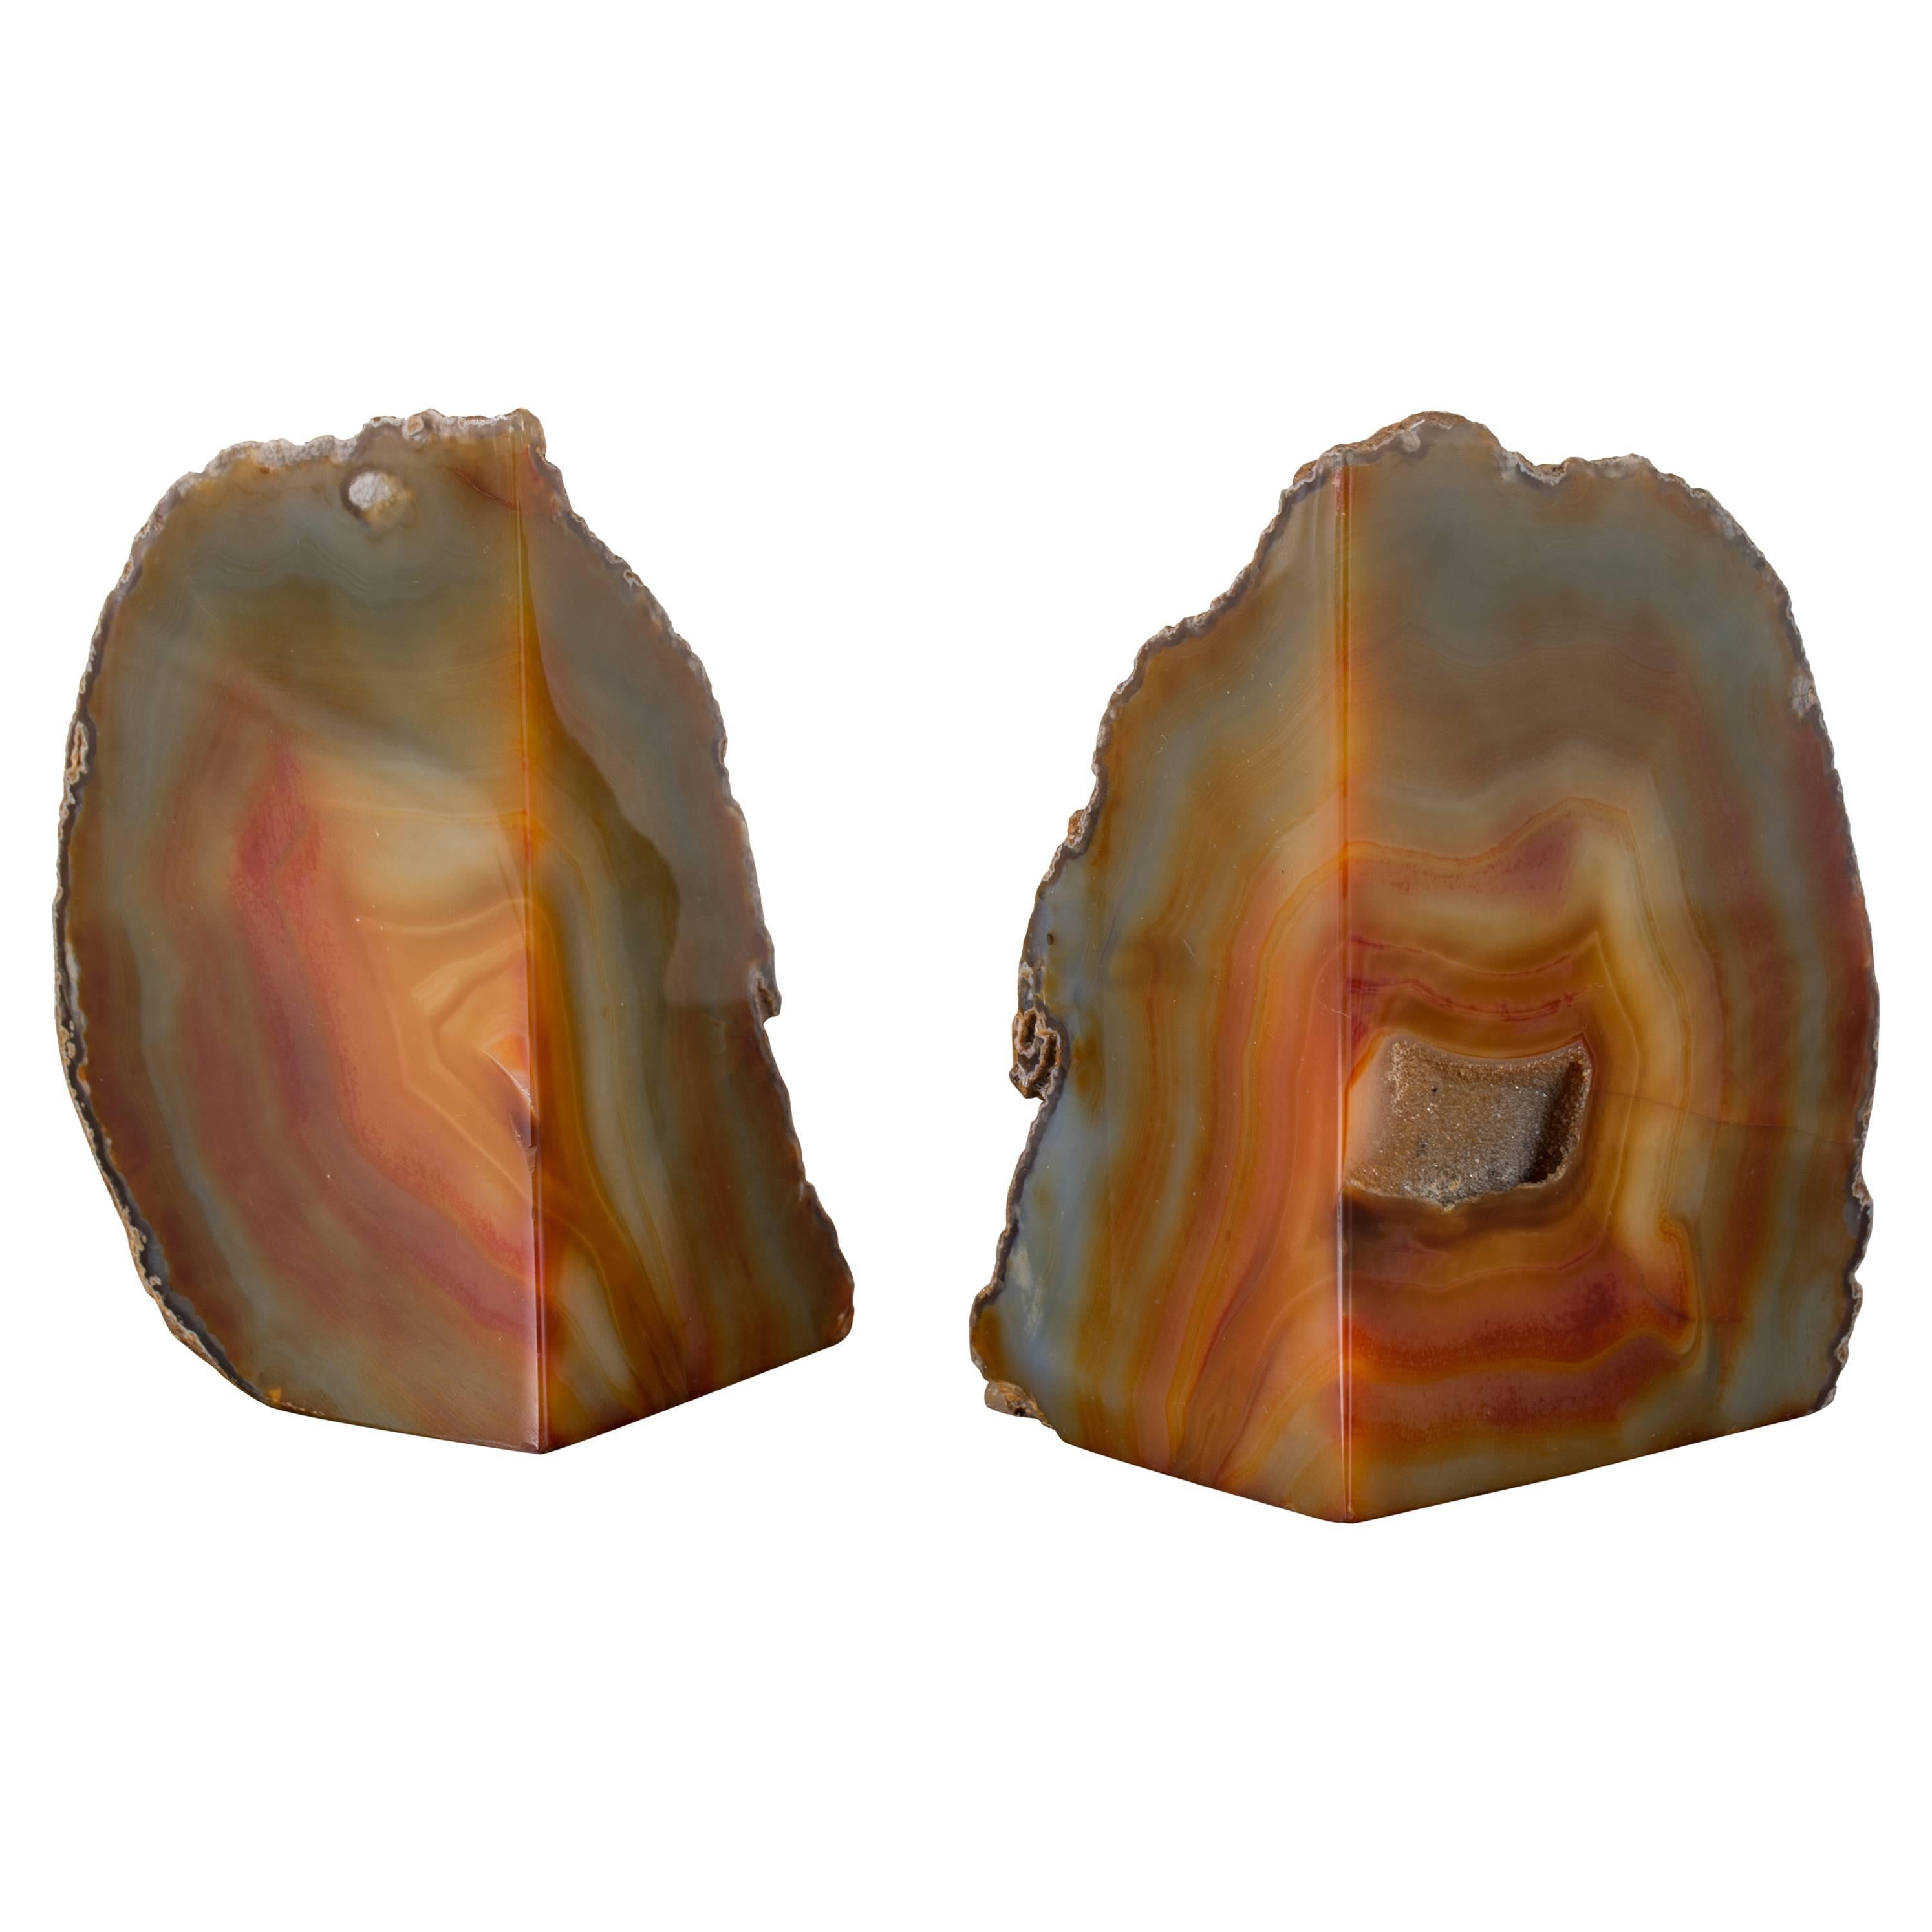 Pair of Vintage Geode Bookends from Brazil